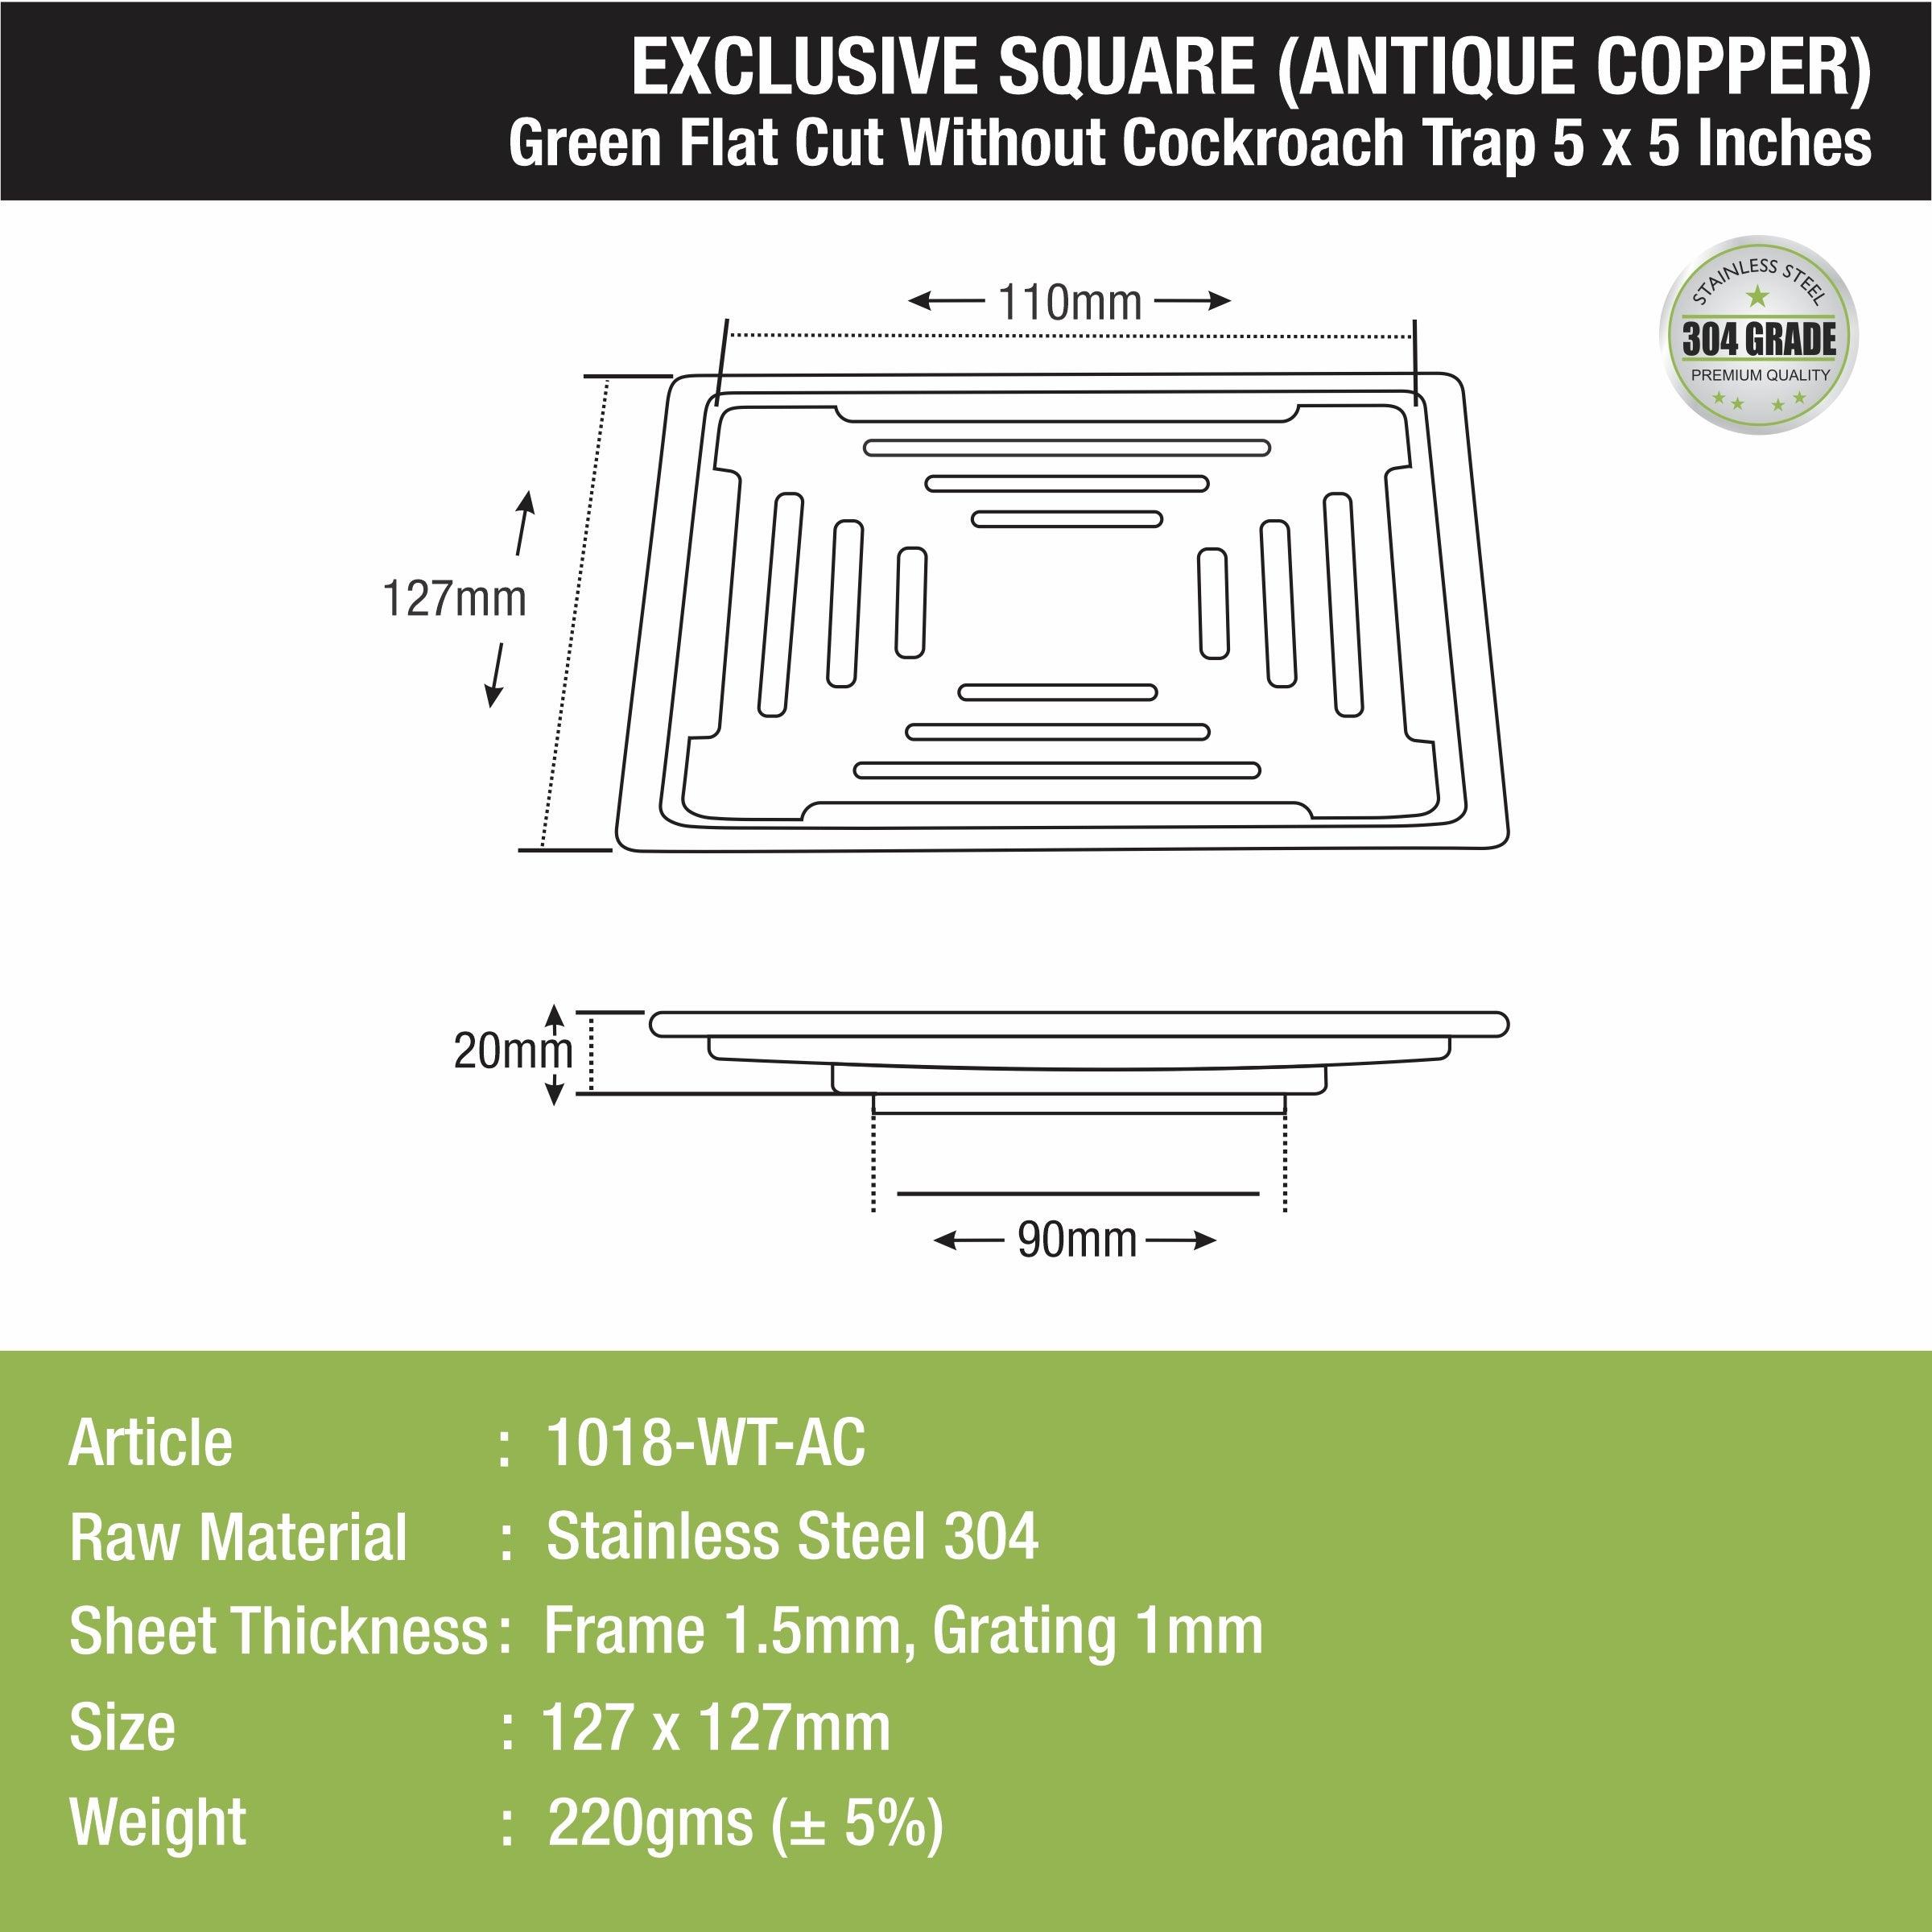 Green Exclusive Square Flat Cut Floor Drain in Antique Copper PVD Coating (5 x 5 Inches) sizes and dimensions